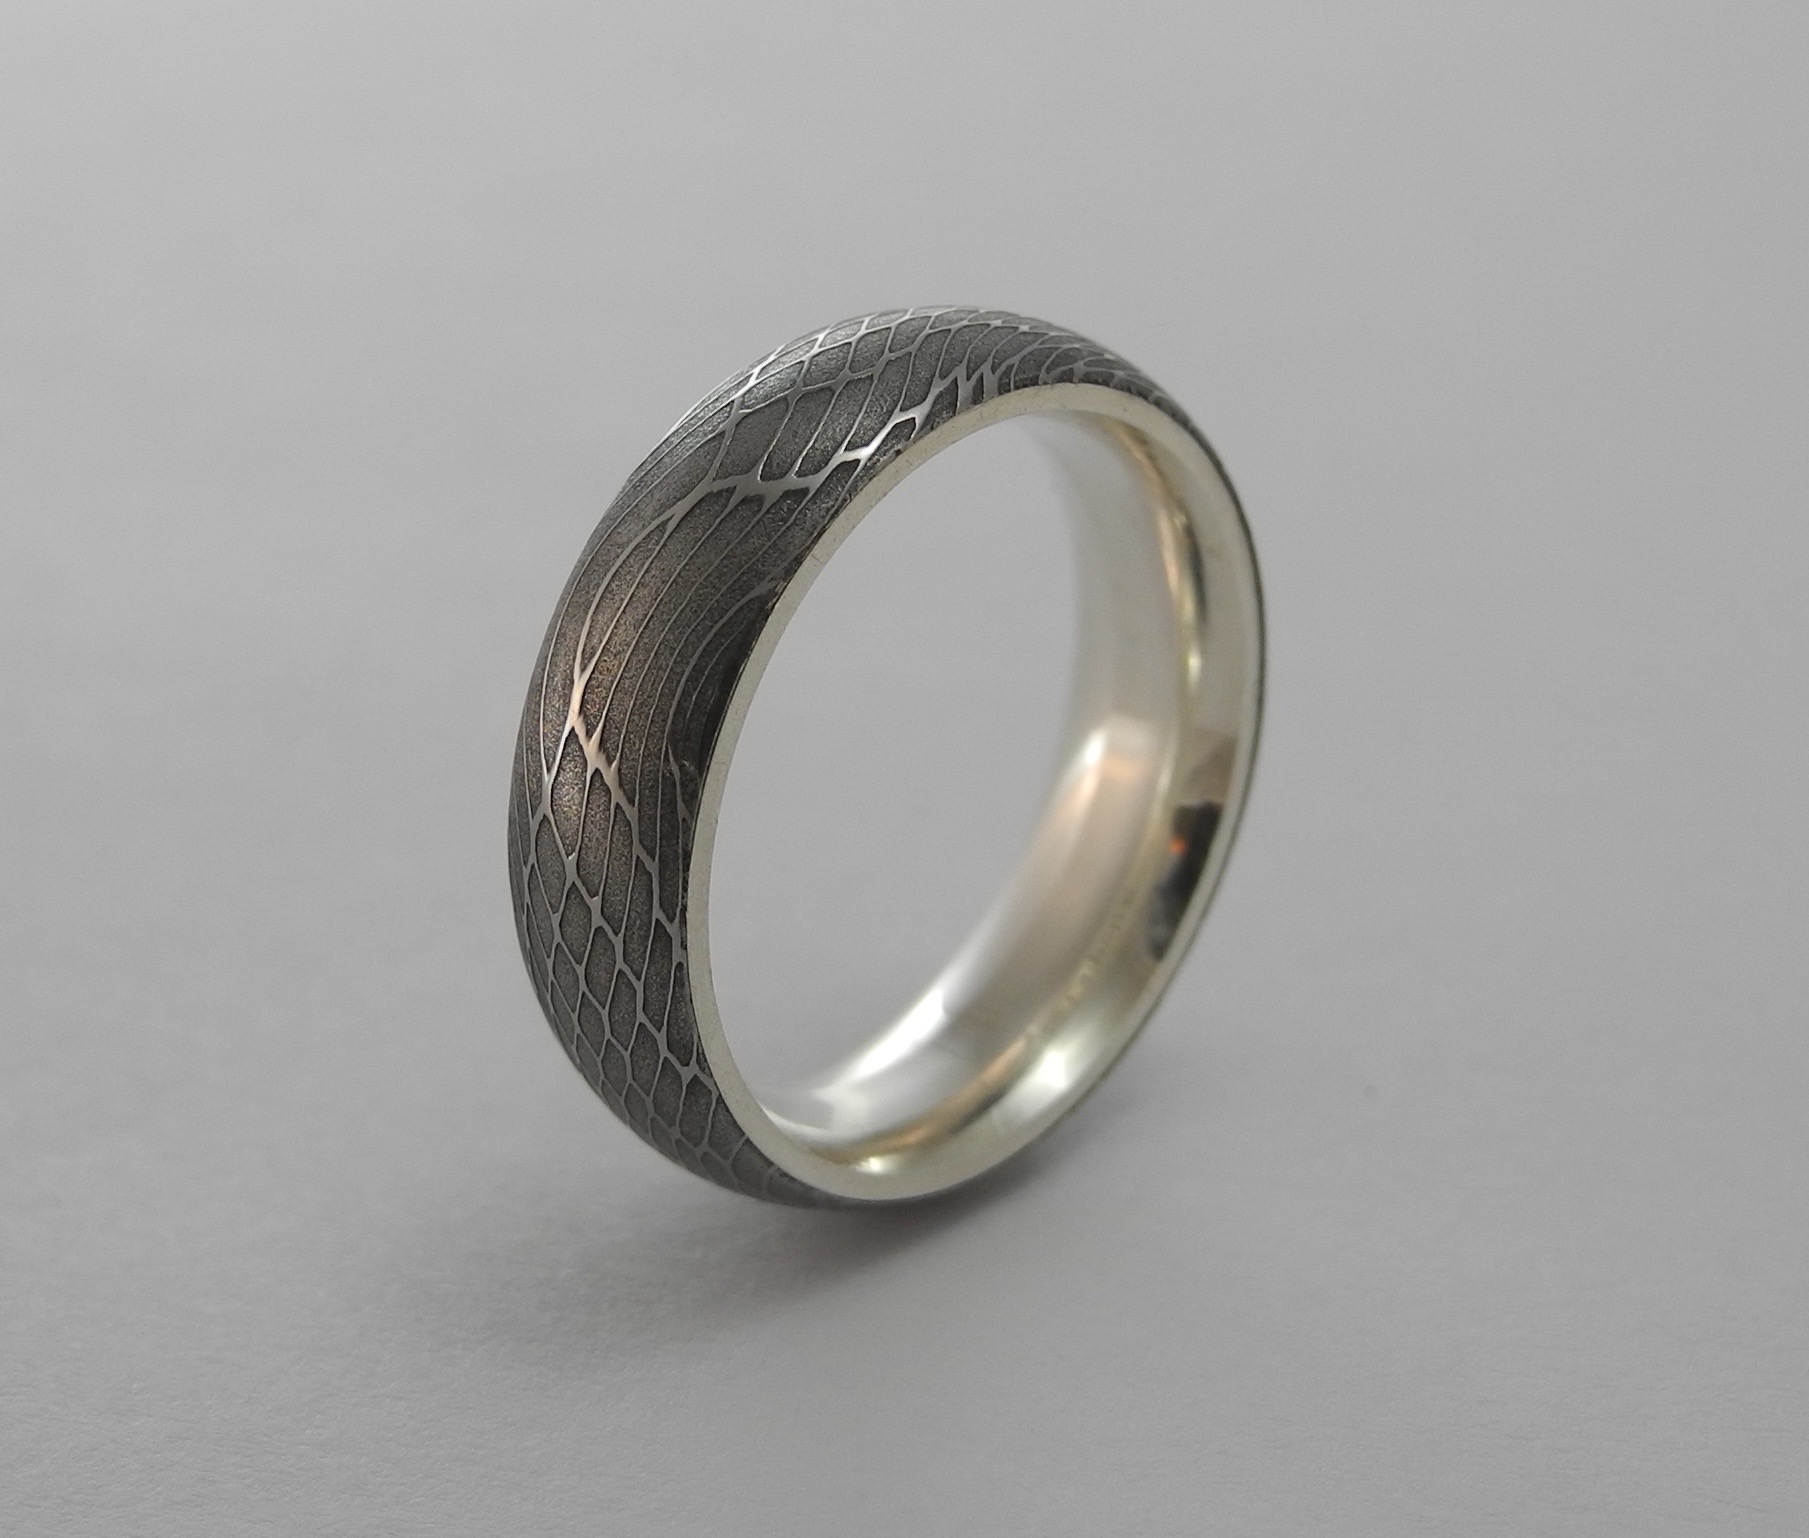 Spider Silk Damascus Ring with Silver Interior by Carbon 6